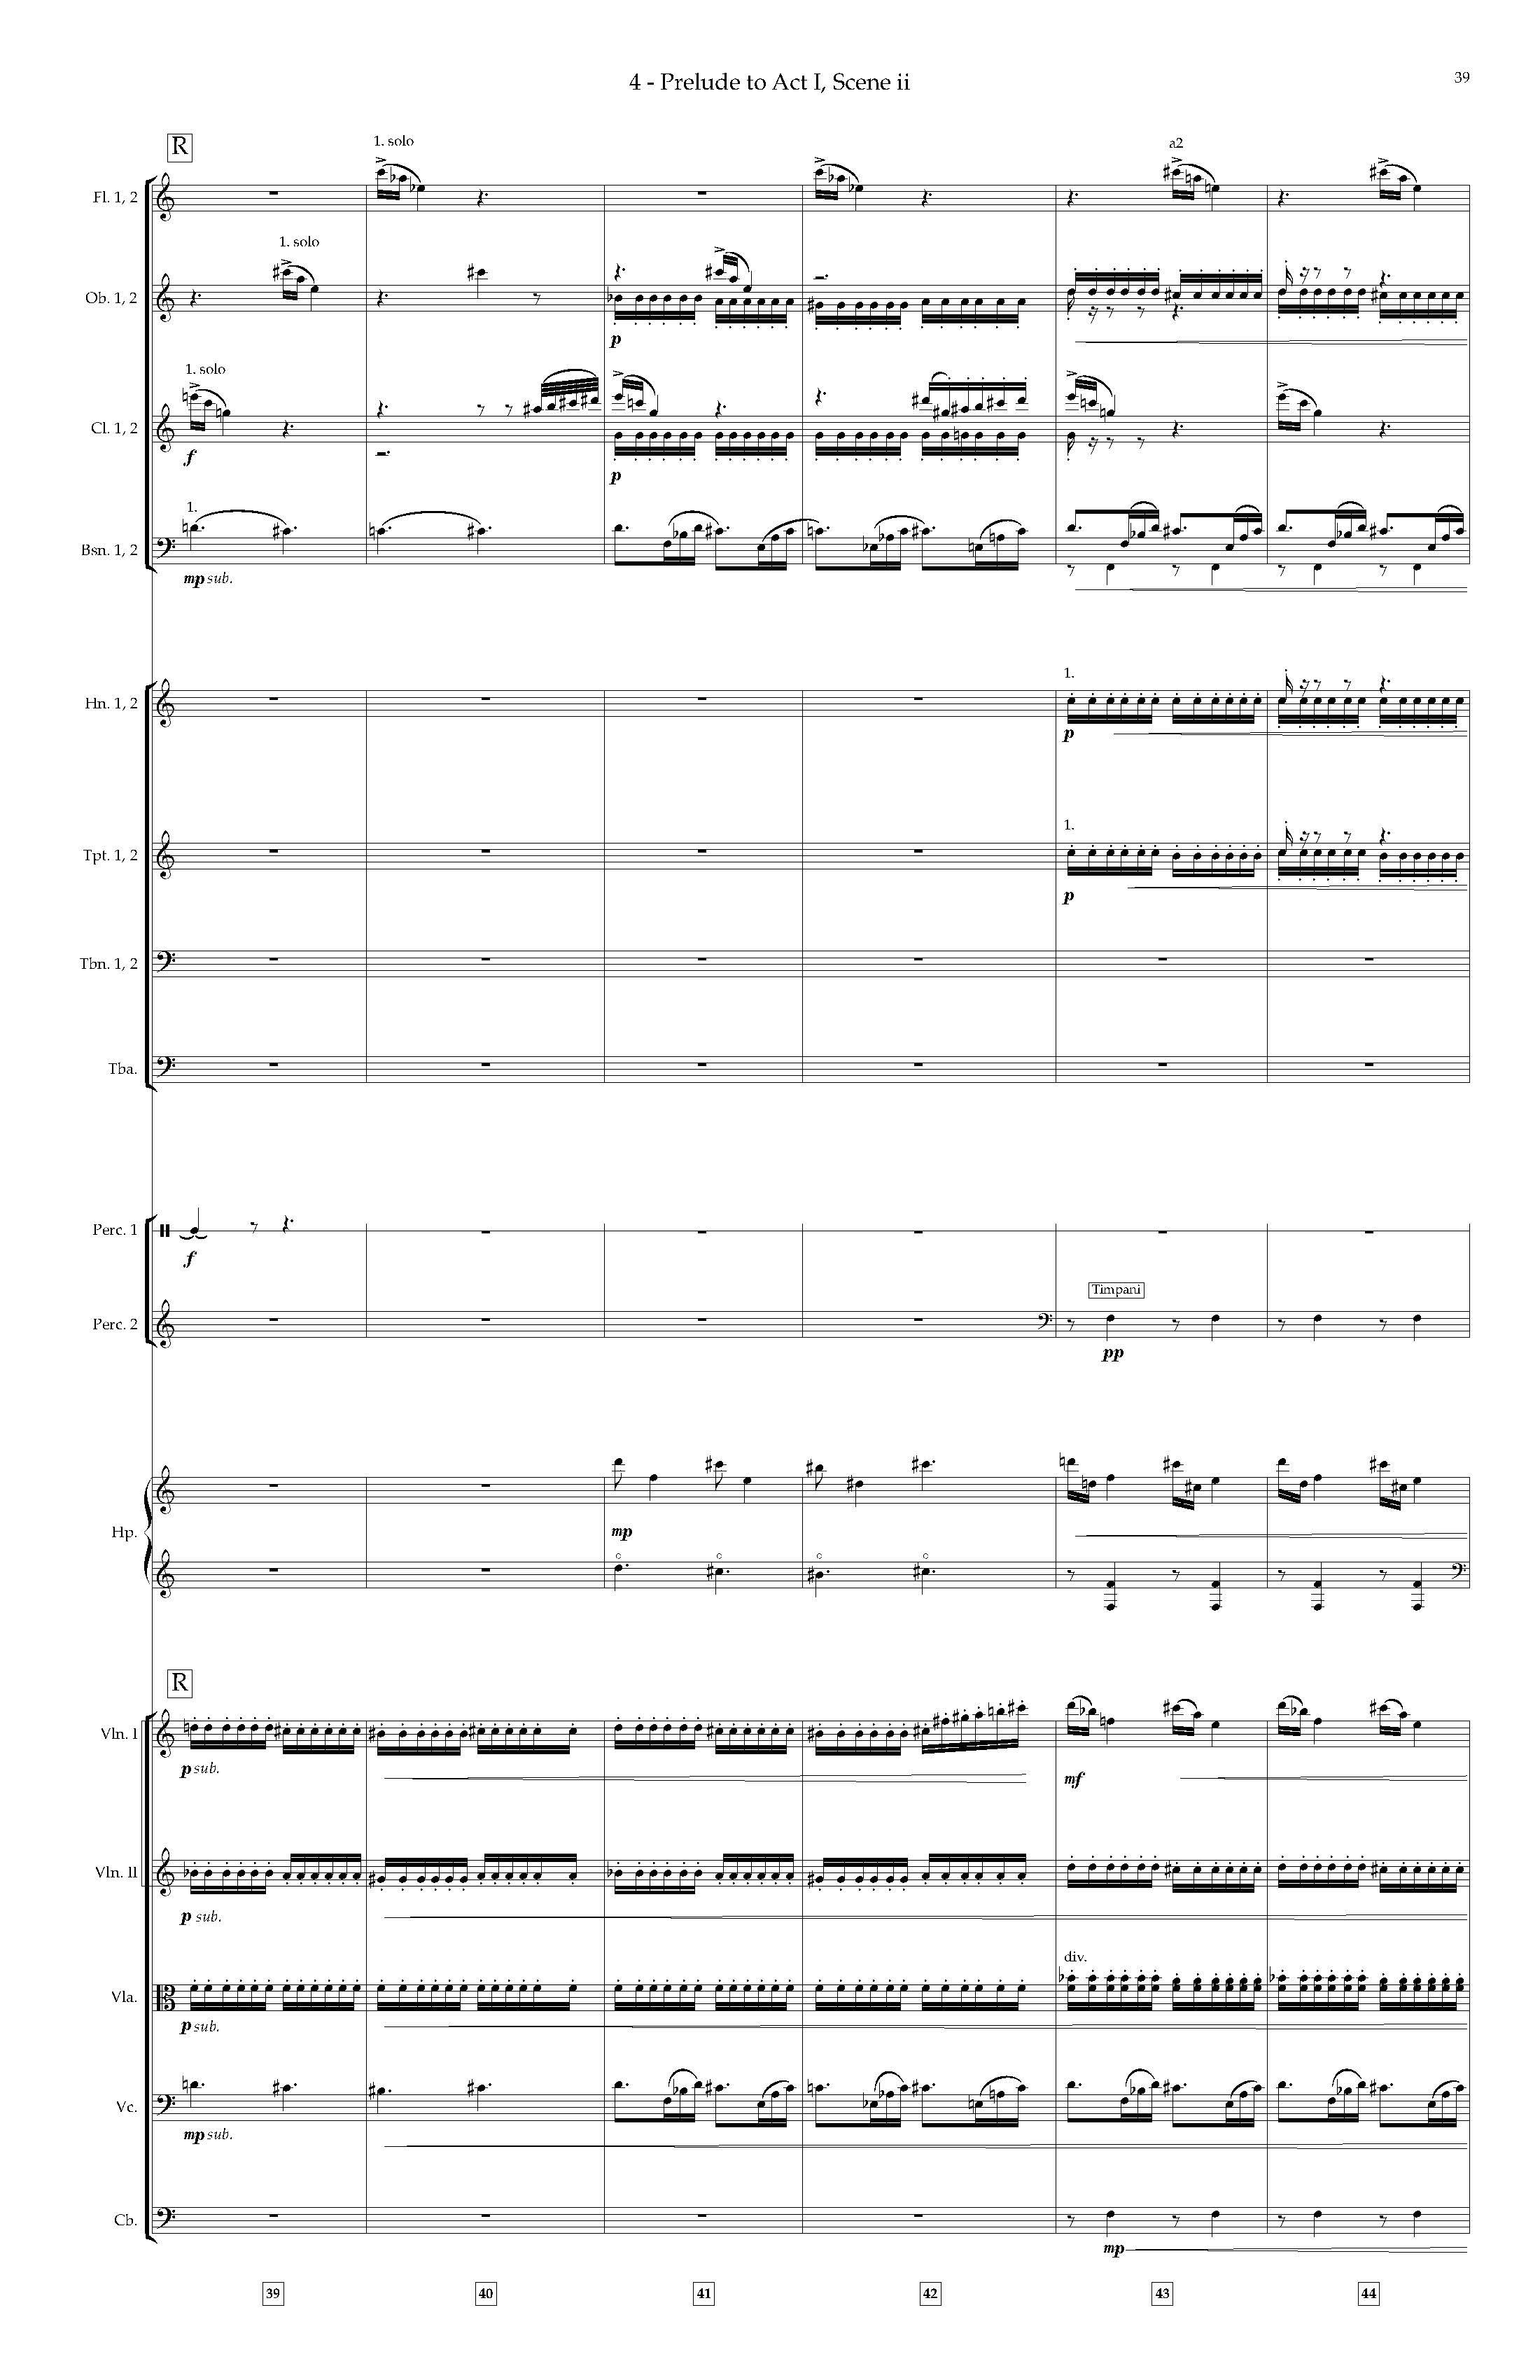 Arias and Interludes from HWGS - Complete Score_Page_45.jpg